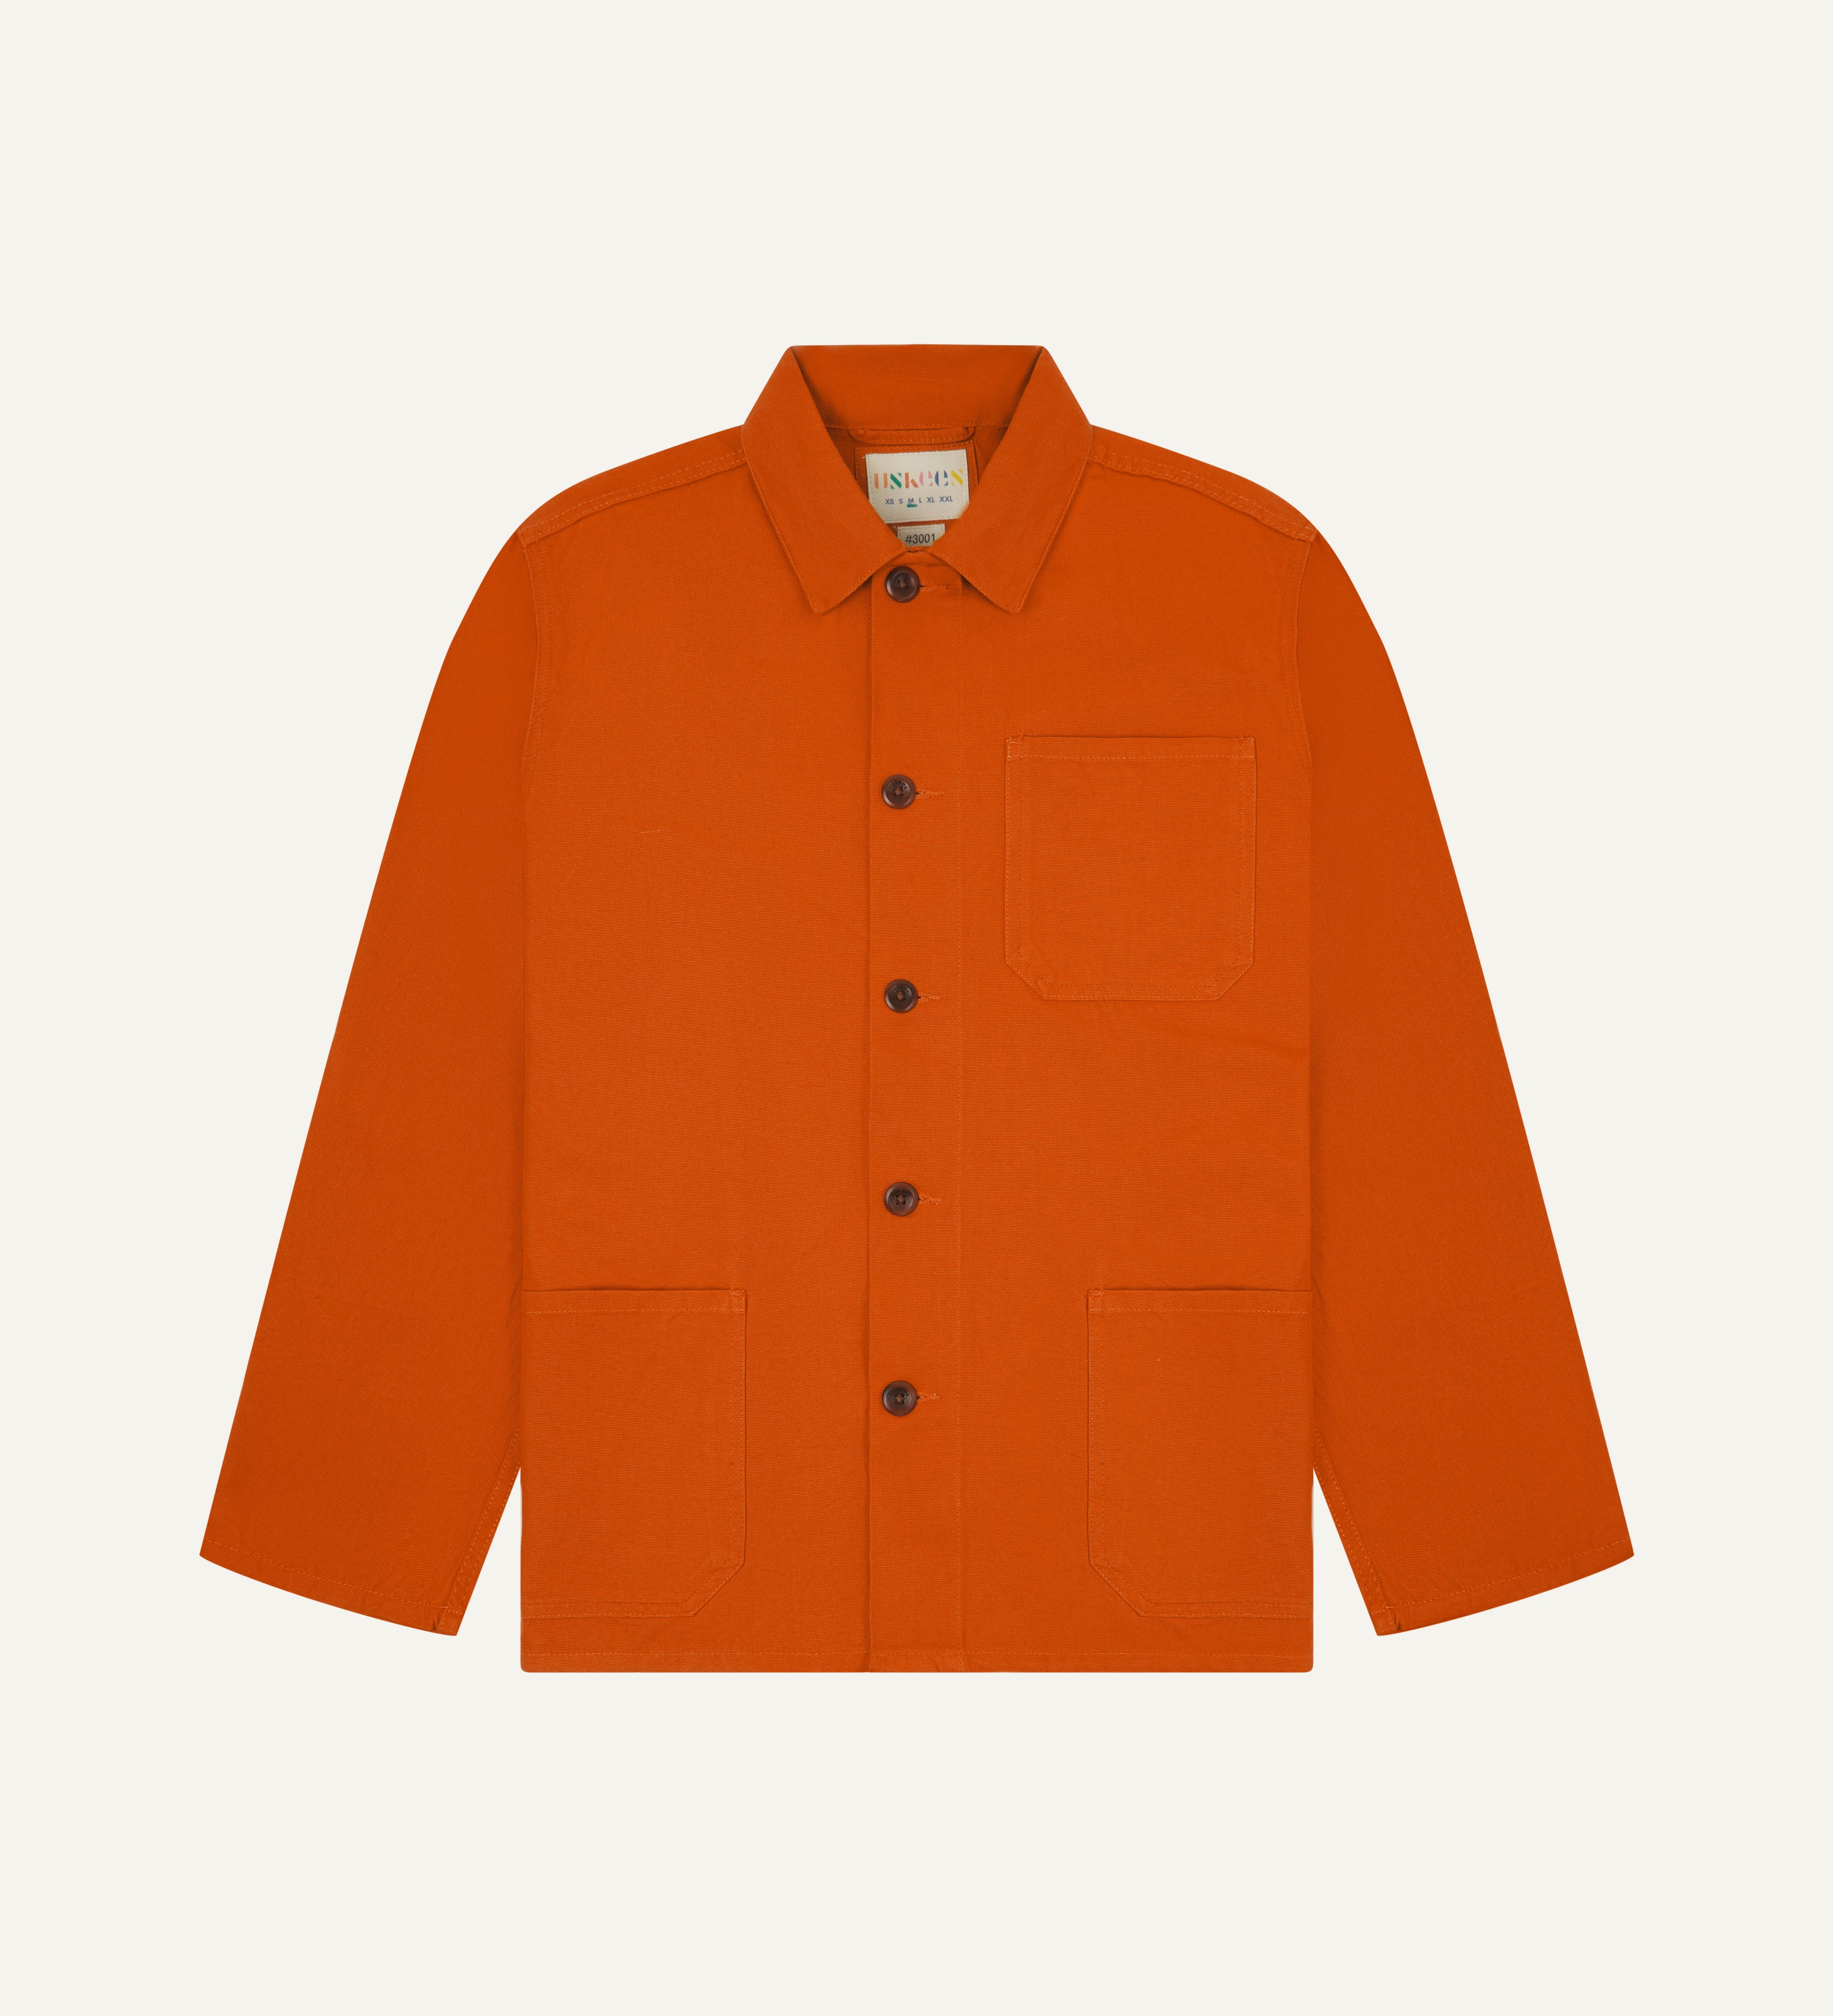 Front flat shot of an uskees orange men's overshirt showing contrast brown corozo buttons and brand label at neck.